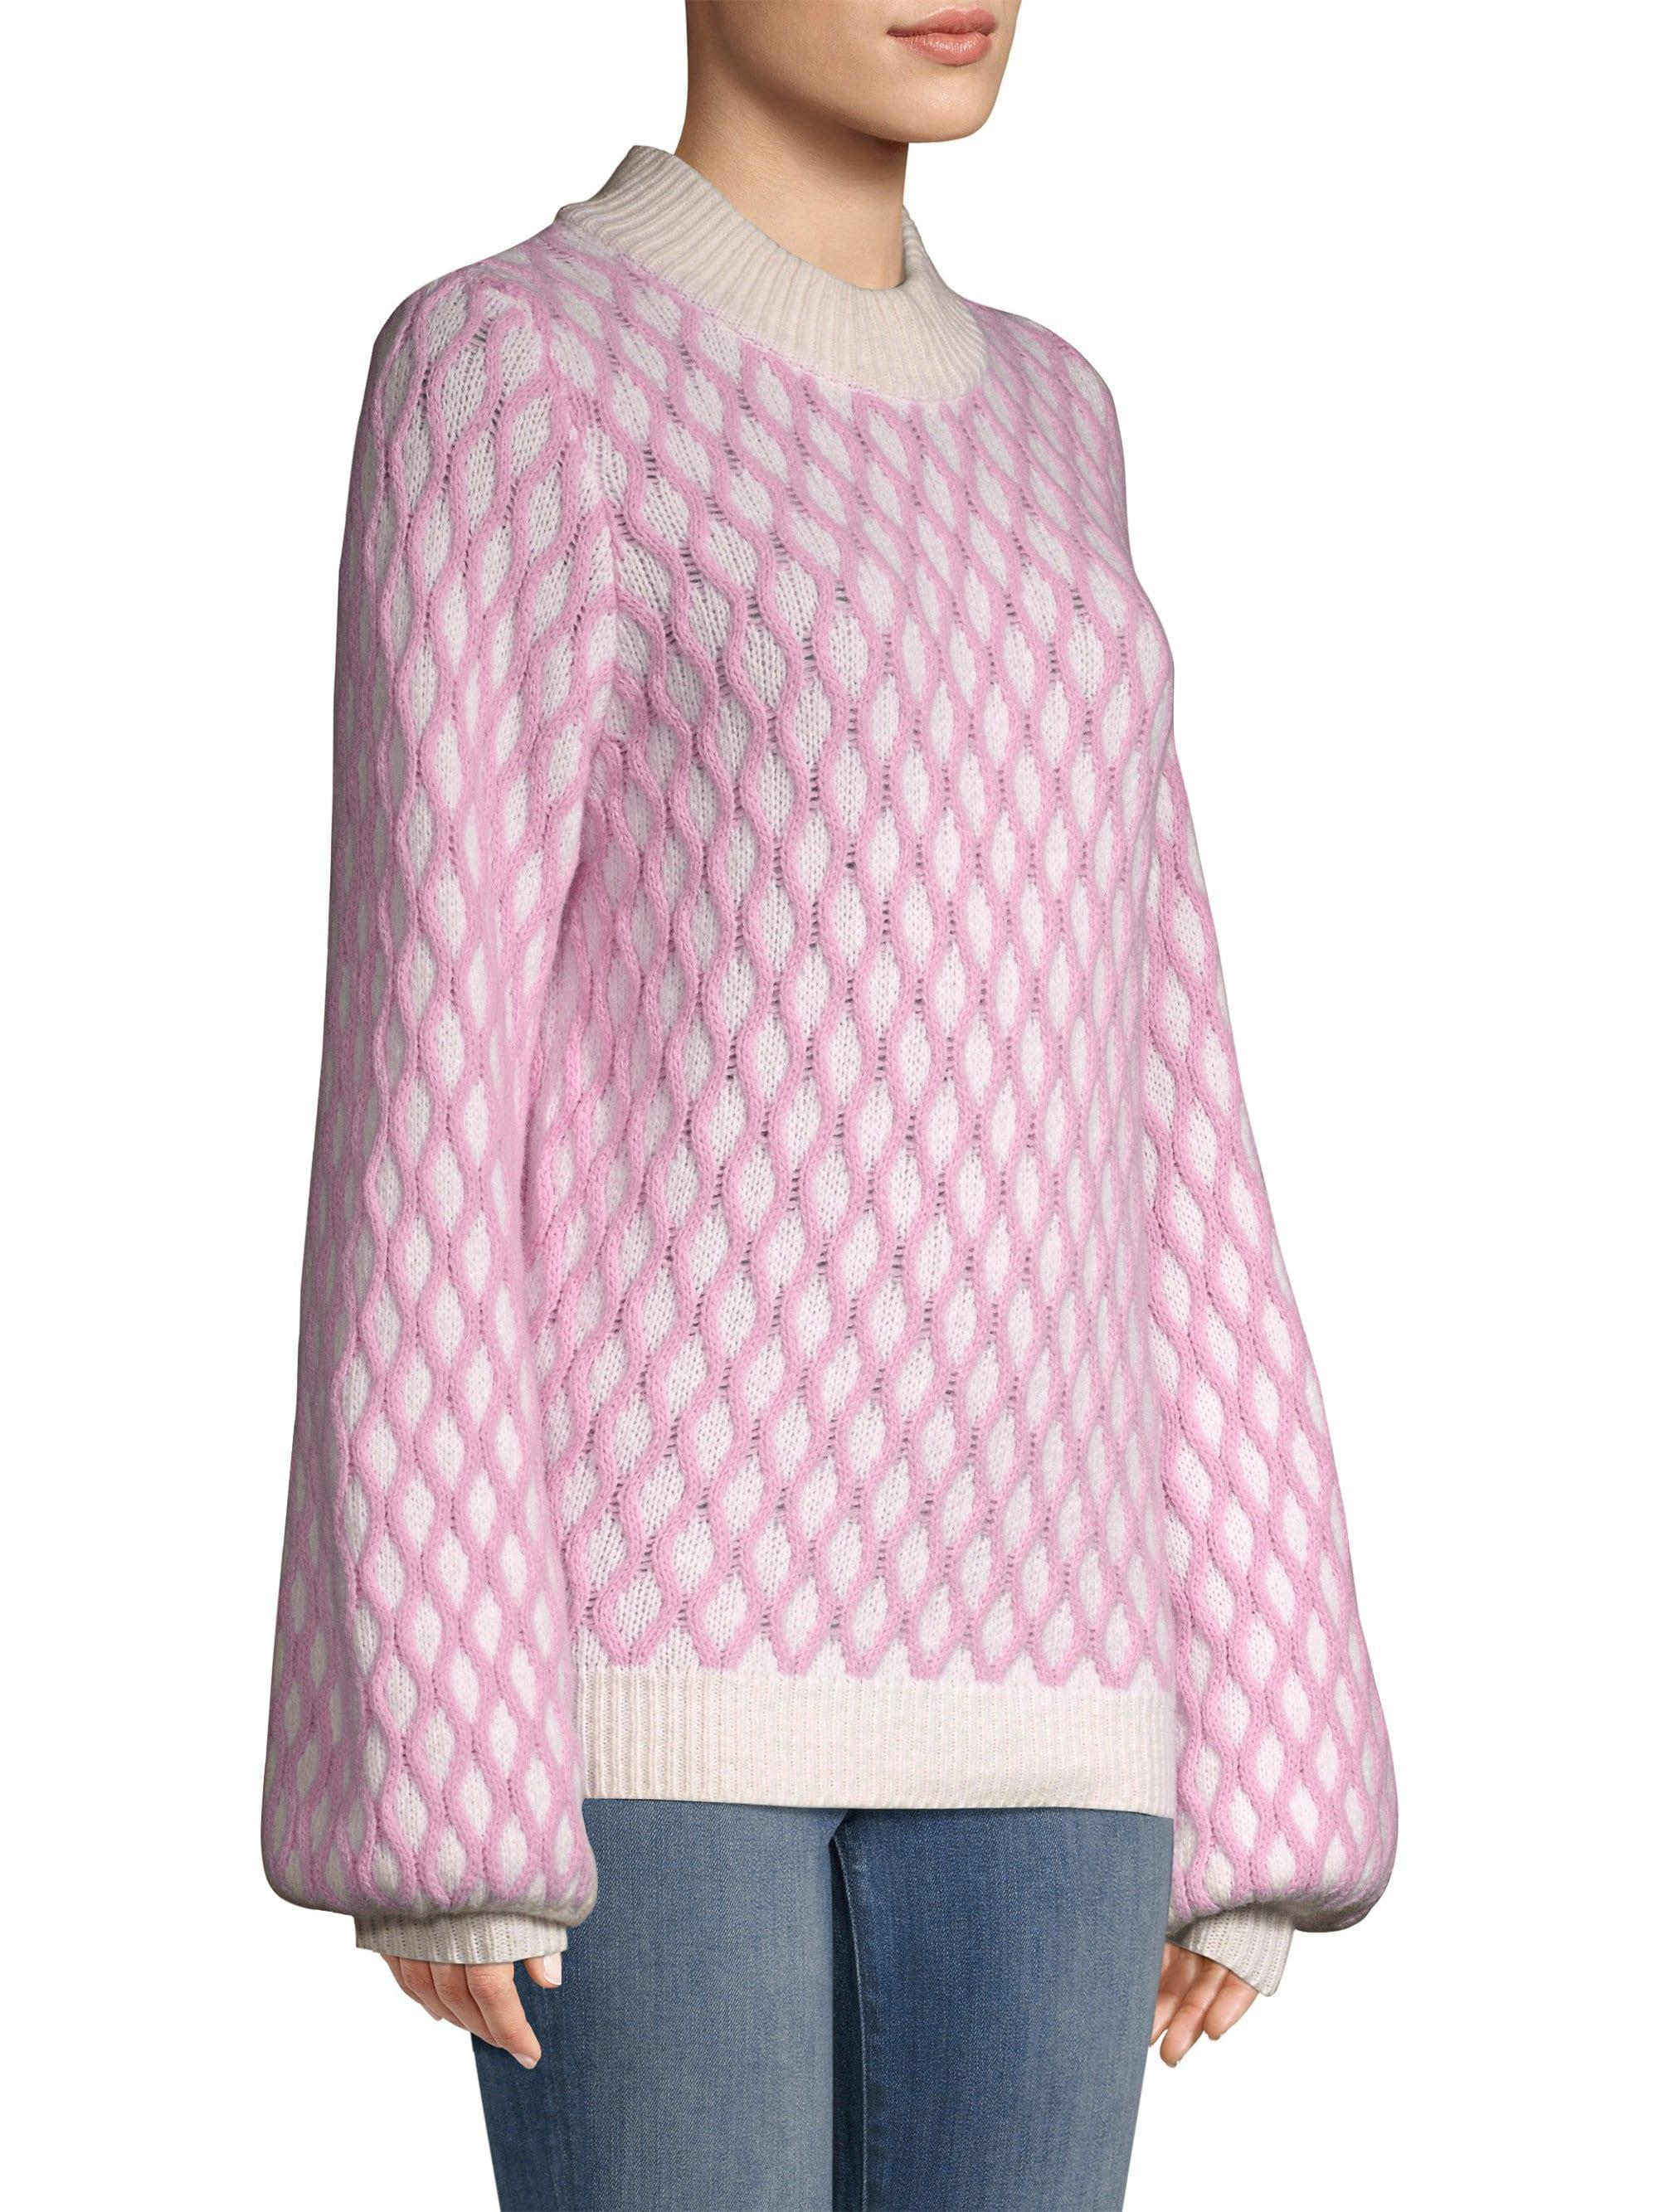 forord Nathaniel Ward Ideel Stine Goya Carlo Cable Knit Wool-blend Sweater in Pink - Lyst